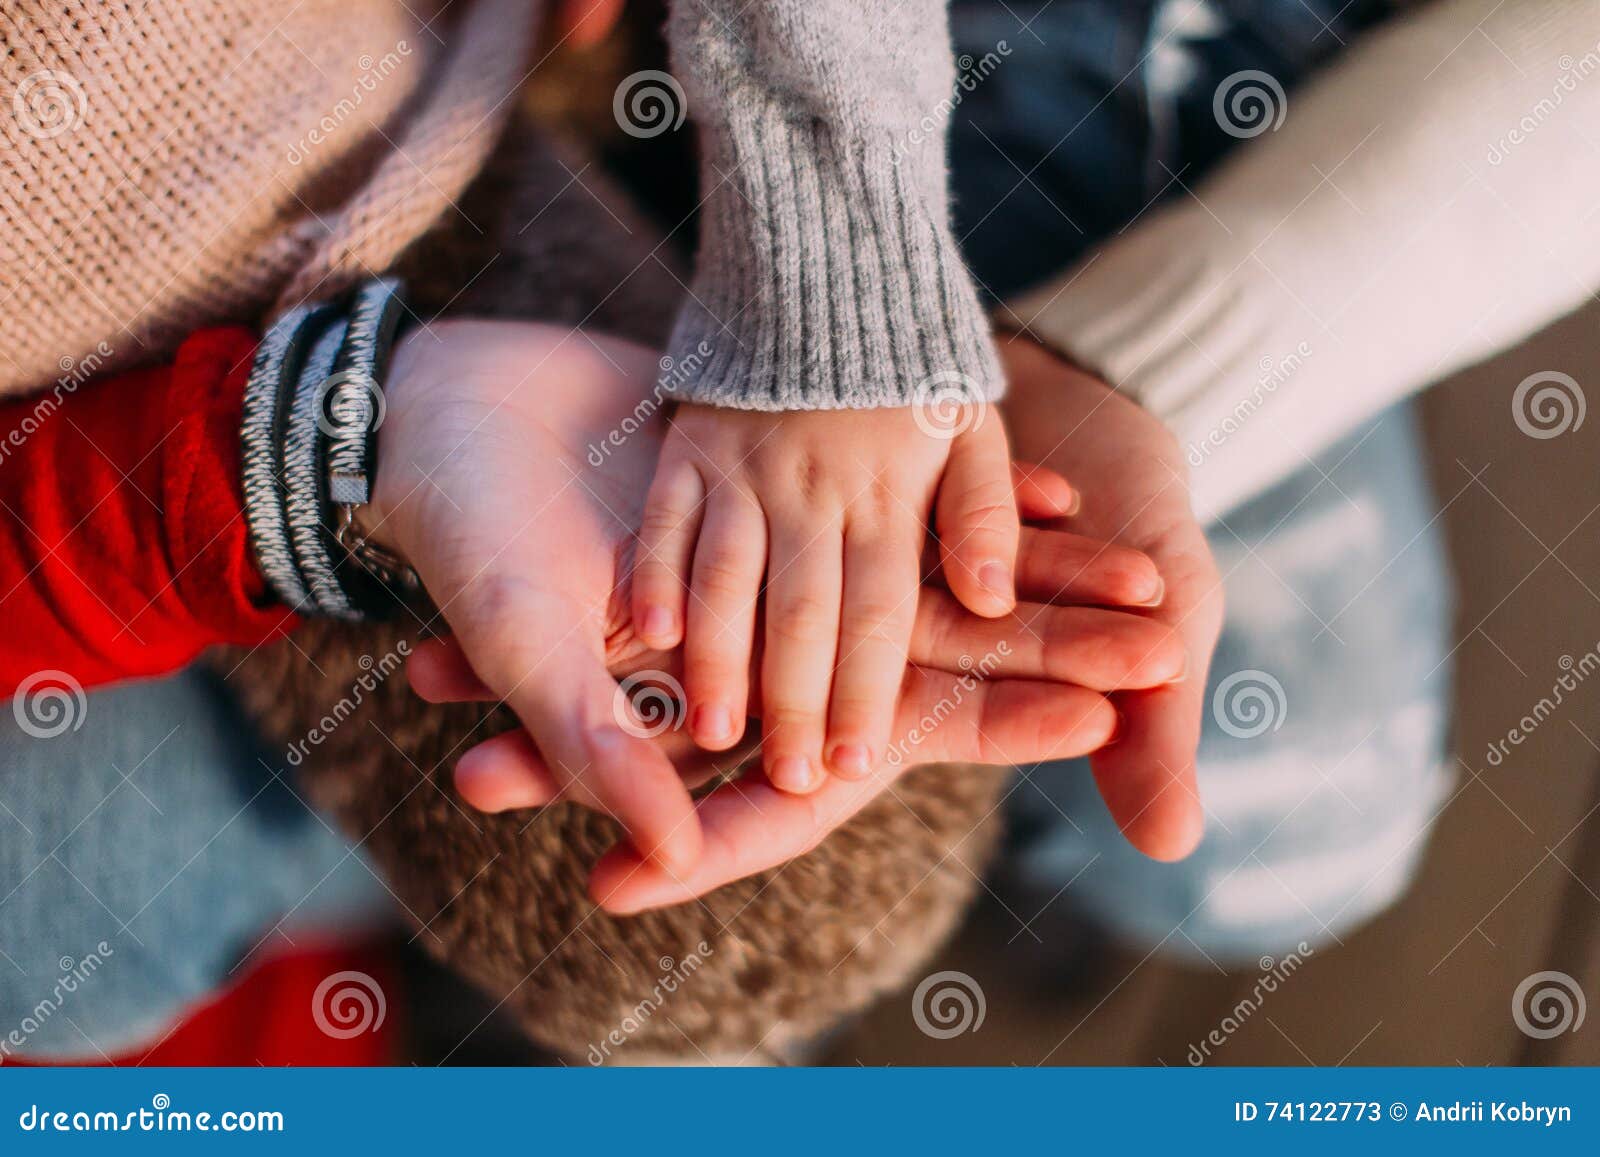 Mom, Dad and Little Son Holding Hands Close Up Stock Image - Image ...